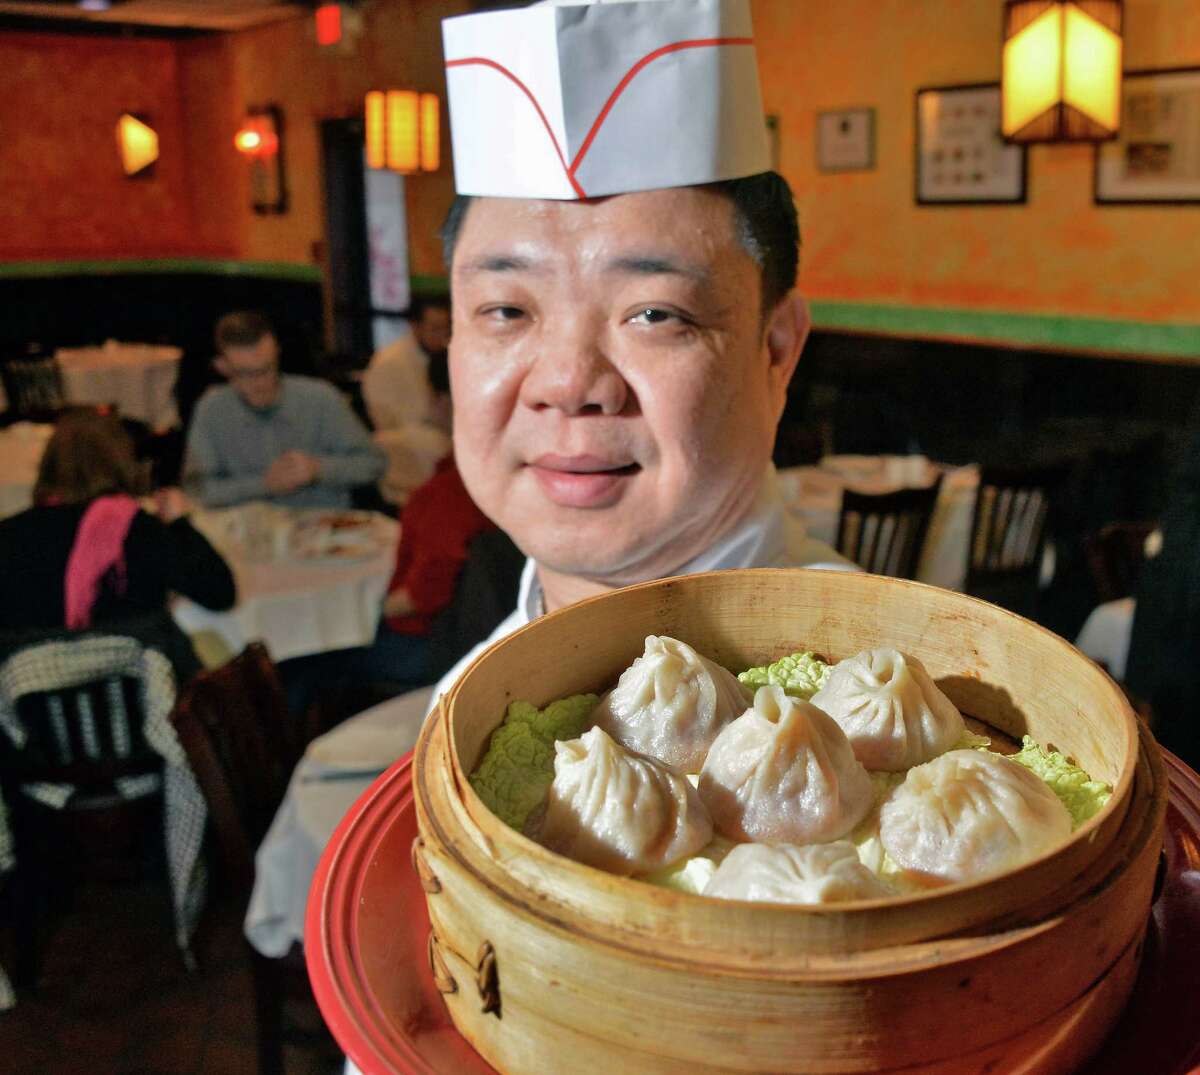 Head chef Qing Sheng Zhou with steamed pork soup dumplings at A la Shanghai Thursday Jan. 21, 2016 in Colonie, NY. (John Carl D'Annibale / Times Union)